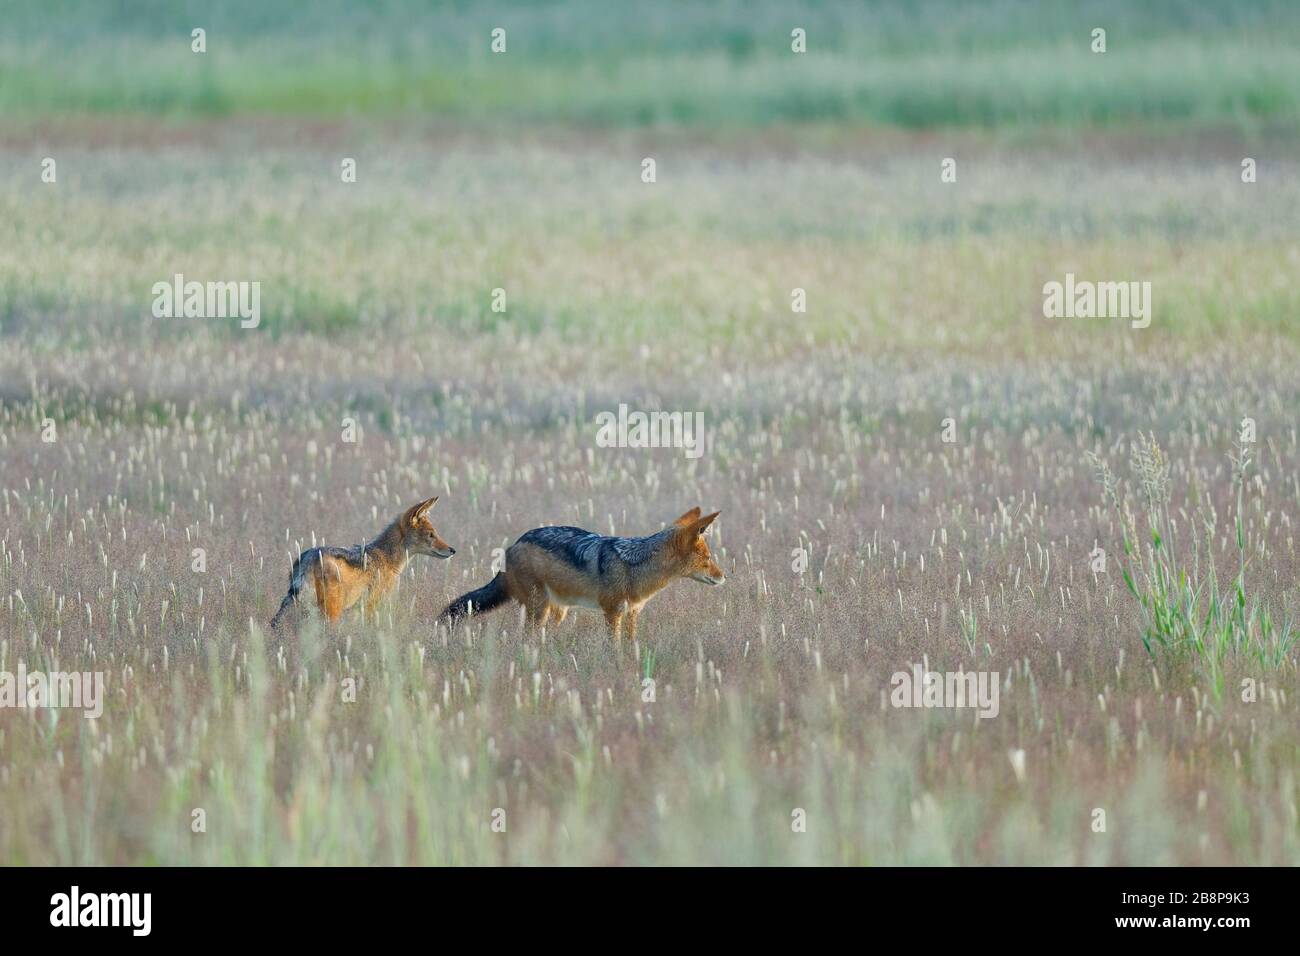 Black-backed jackals (Canis mesomelas), adult with young, in the high grass, early morning, Kgalagadi Transfrontier Park, Northern Cape, South Africa Stock Photo